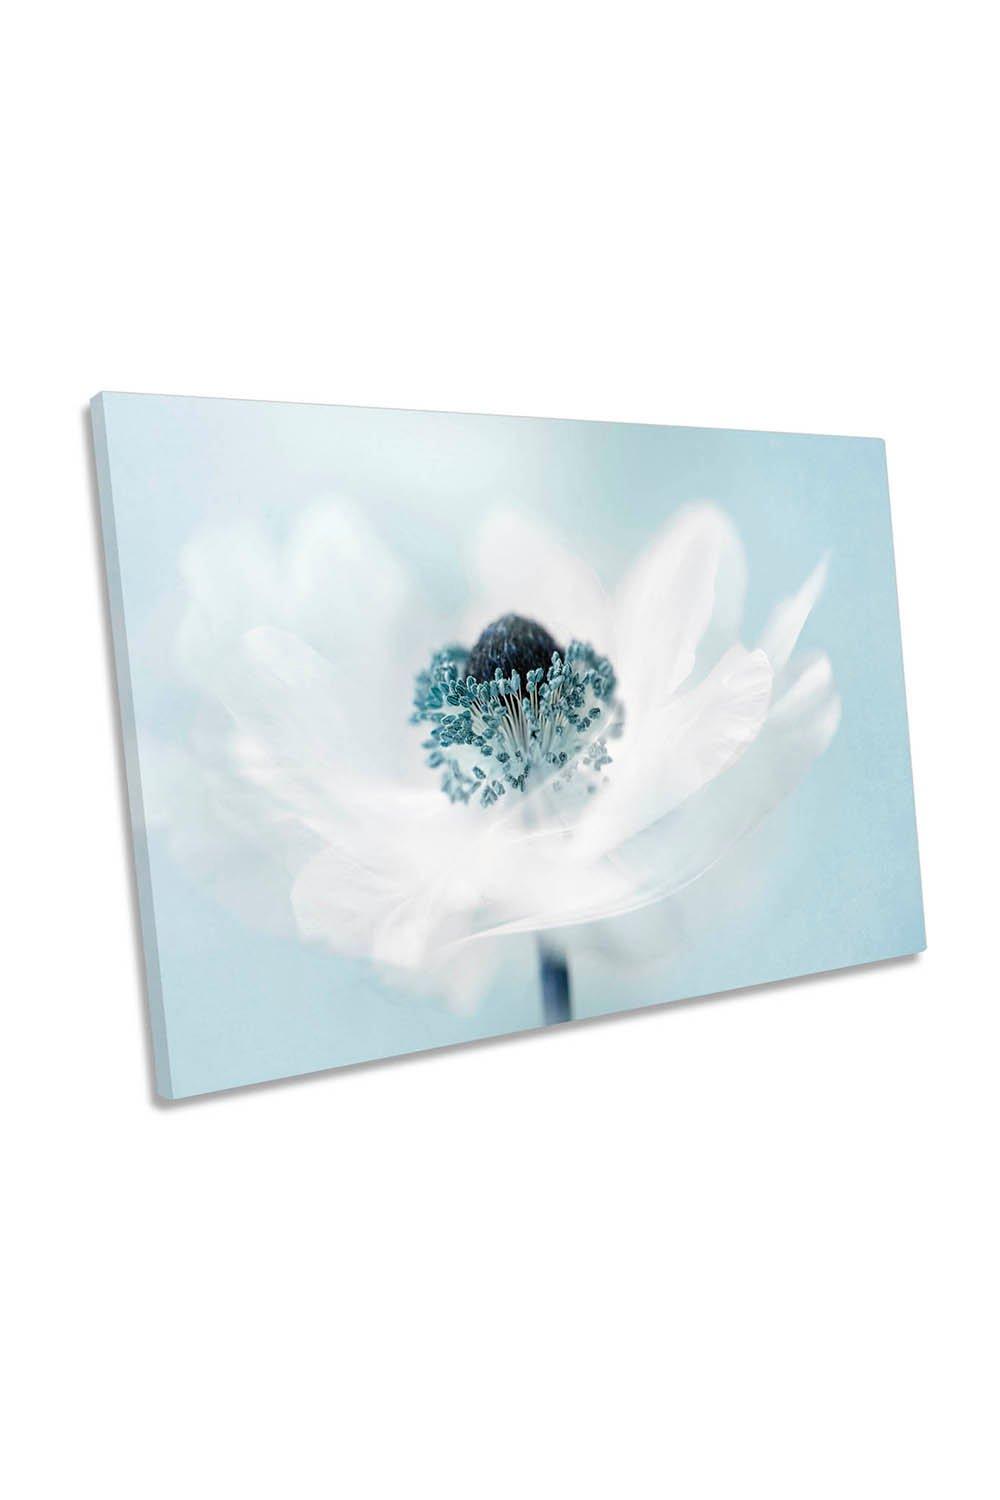 Candy Floss White Flower Blue Canvas Wall Art Picture Print